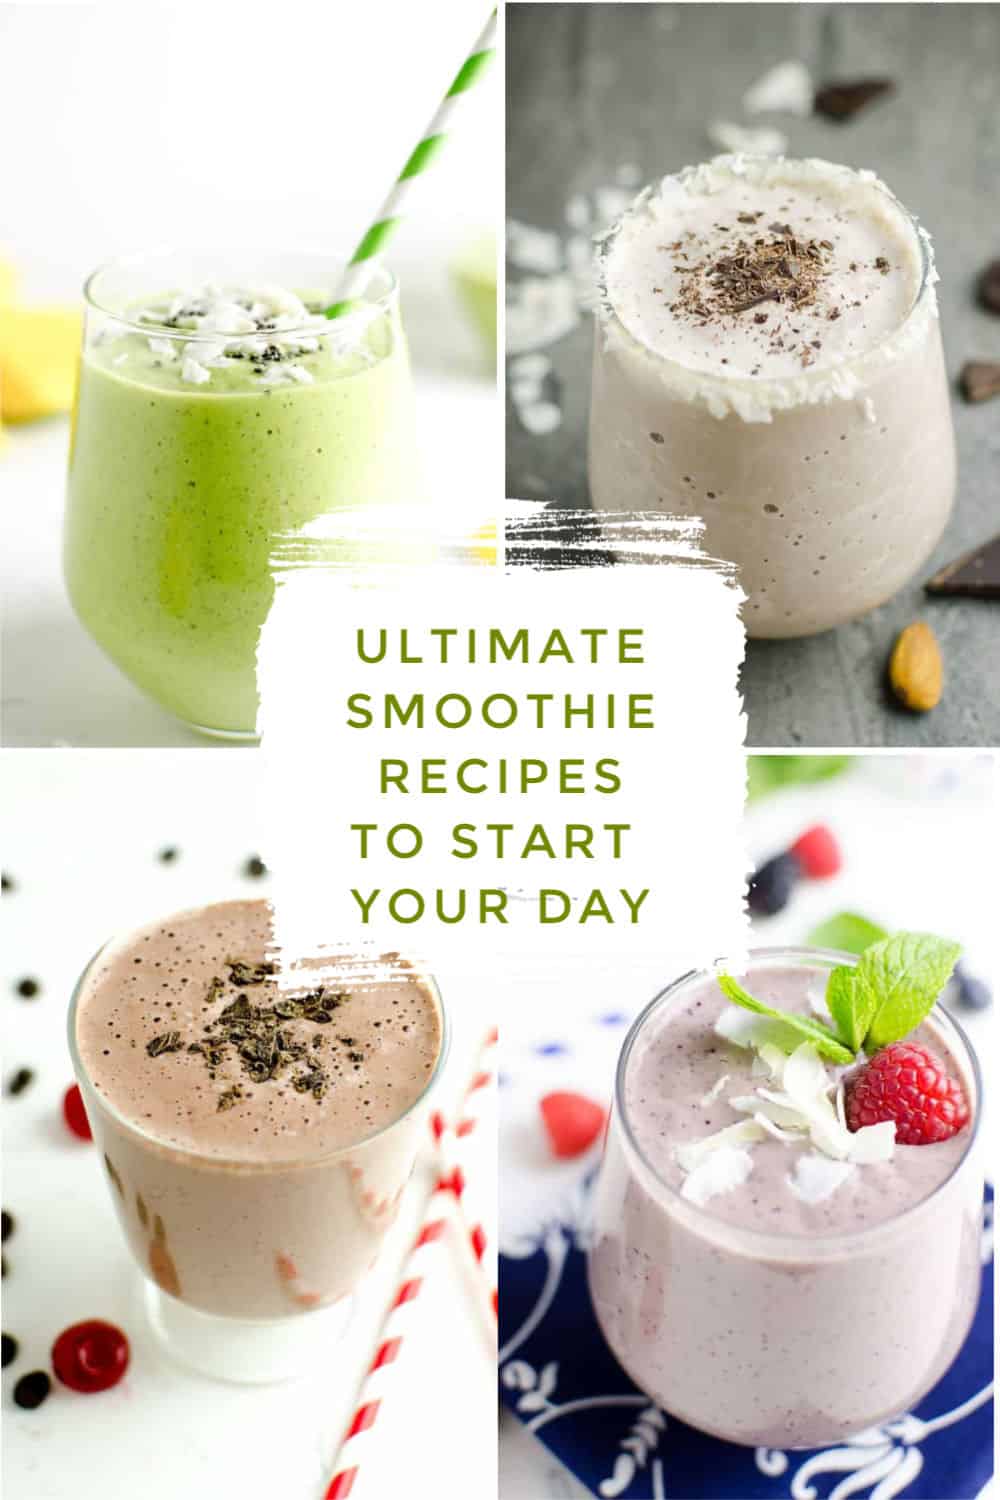 4 image collage with 4 different smoothies pictured.